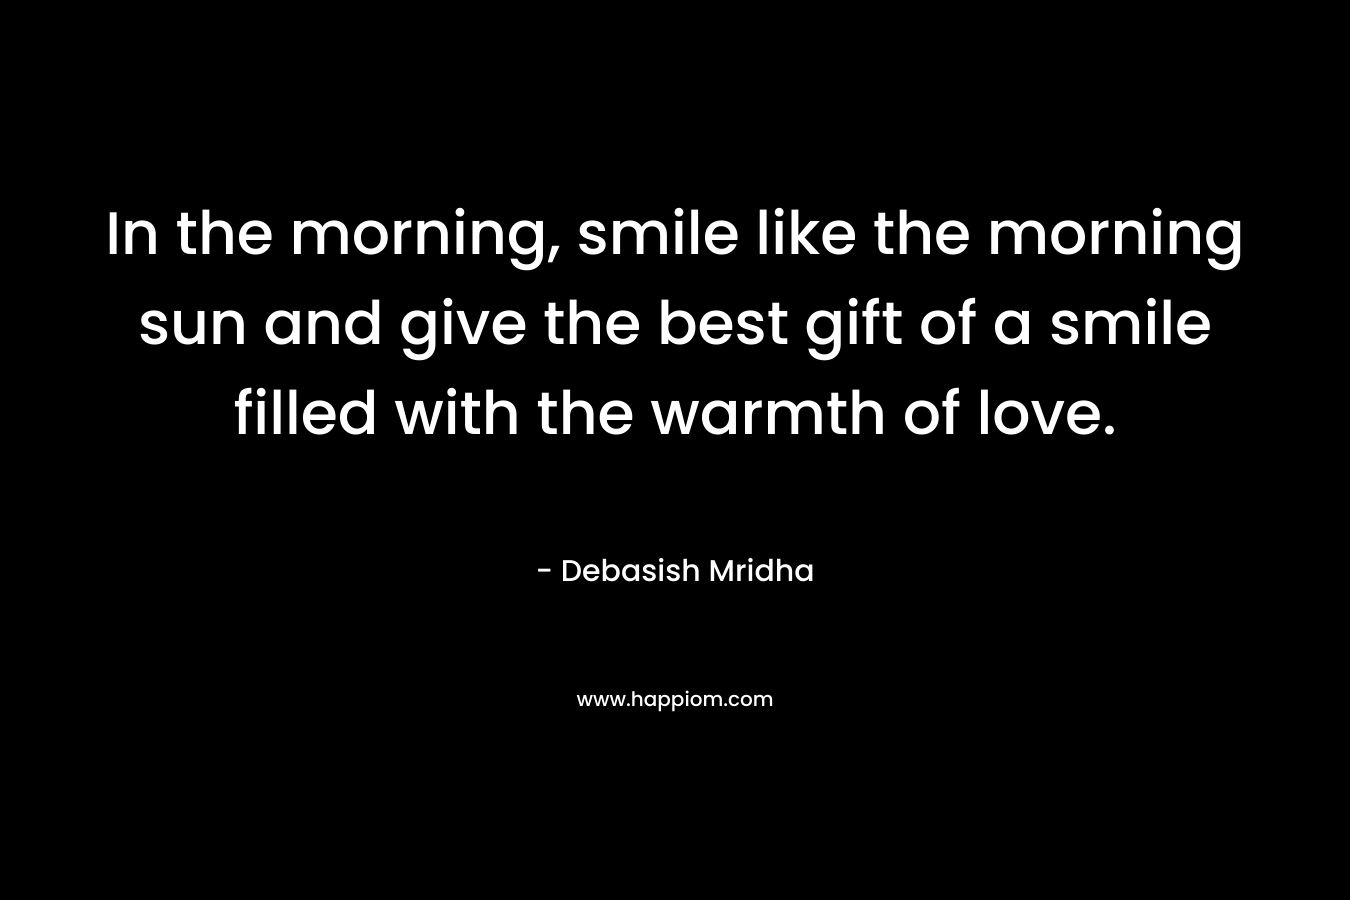 In the morning, smile like the morning sun and give the best gift of a smile filled with the warmth of love.